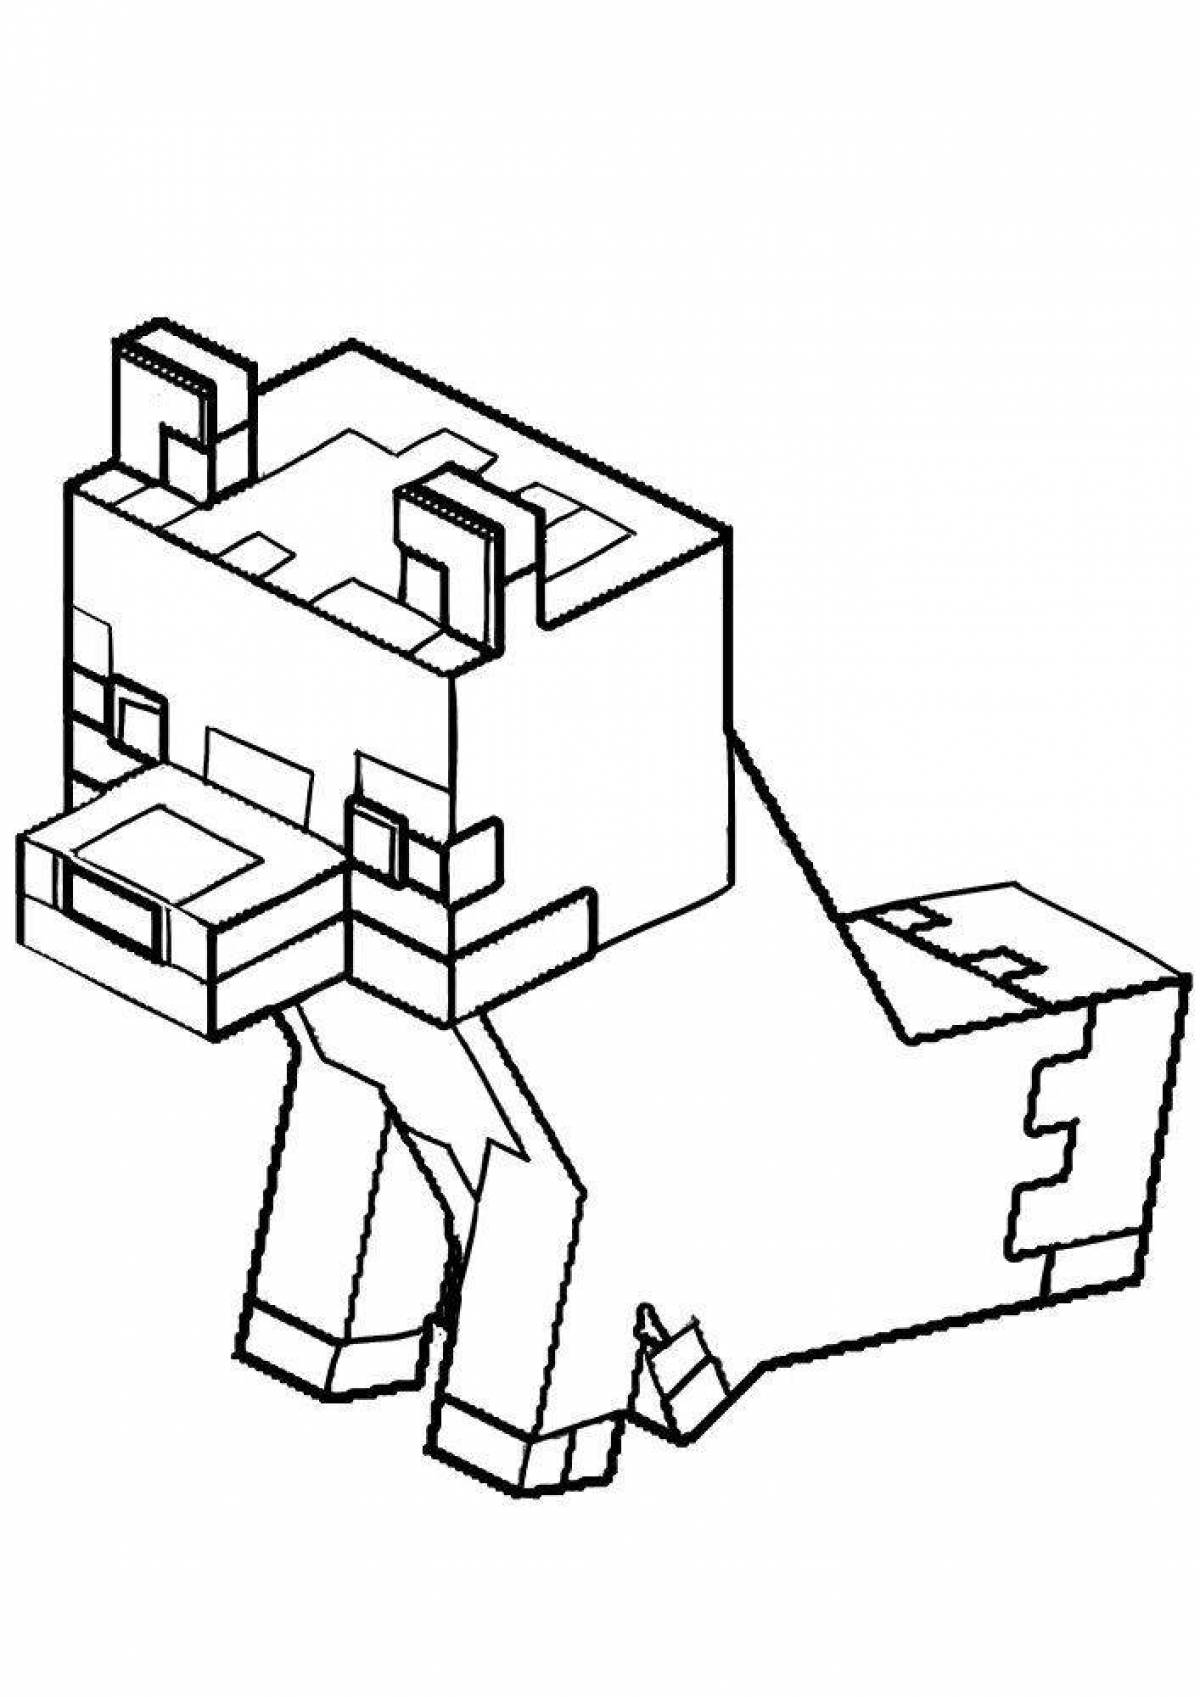 Colorful minecraft fox coloring page